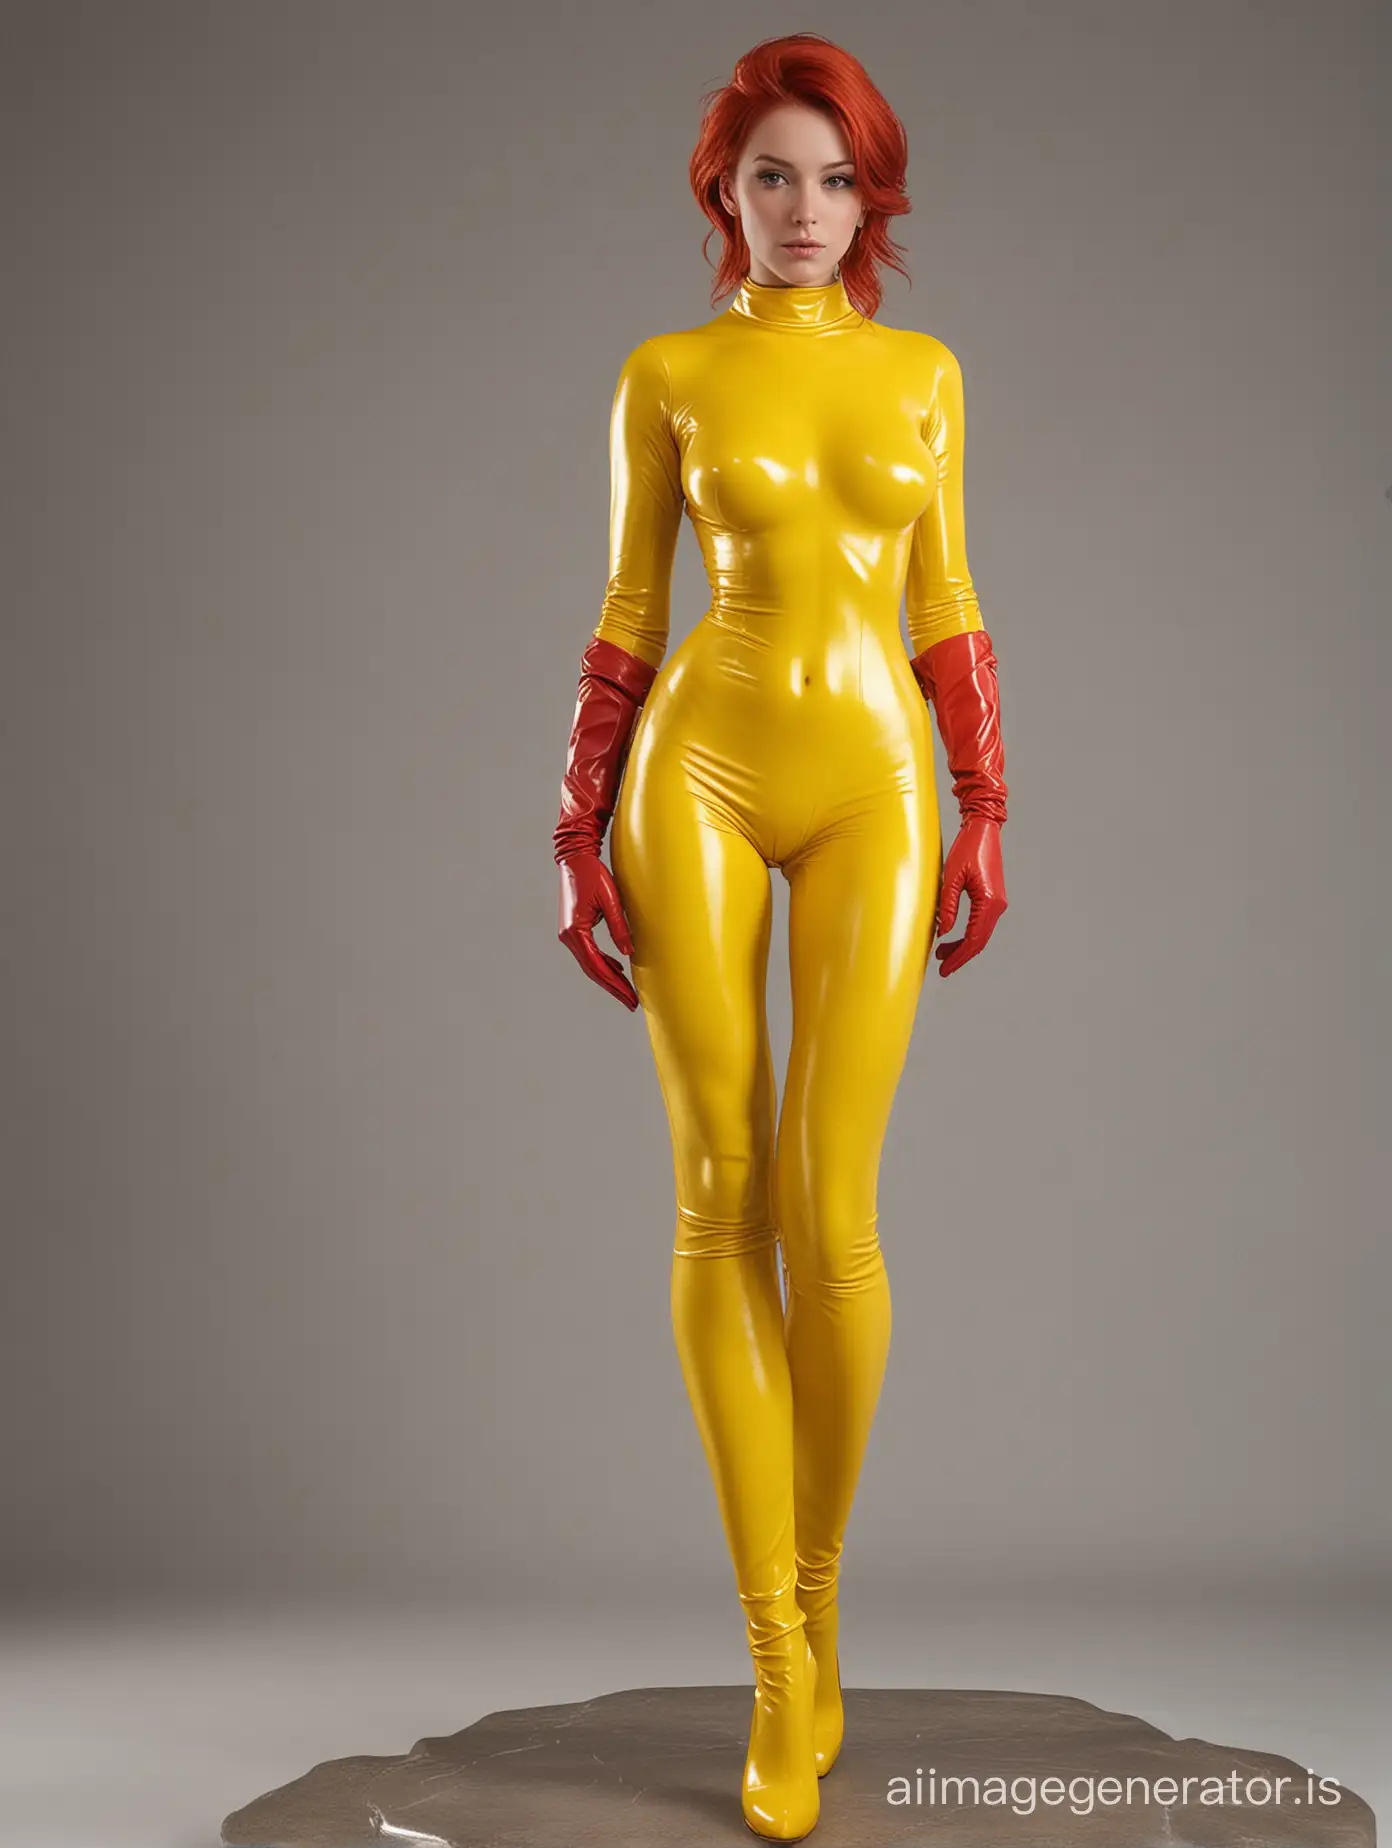 RedHaired-Model-in-HyperRealistic-Latex-Gloves